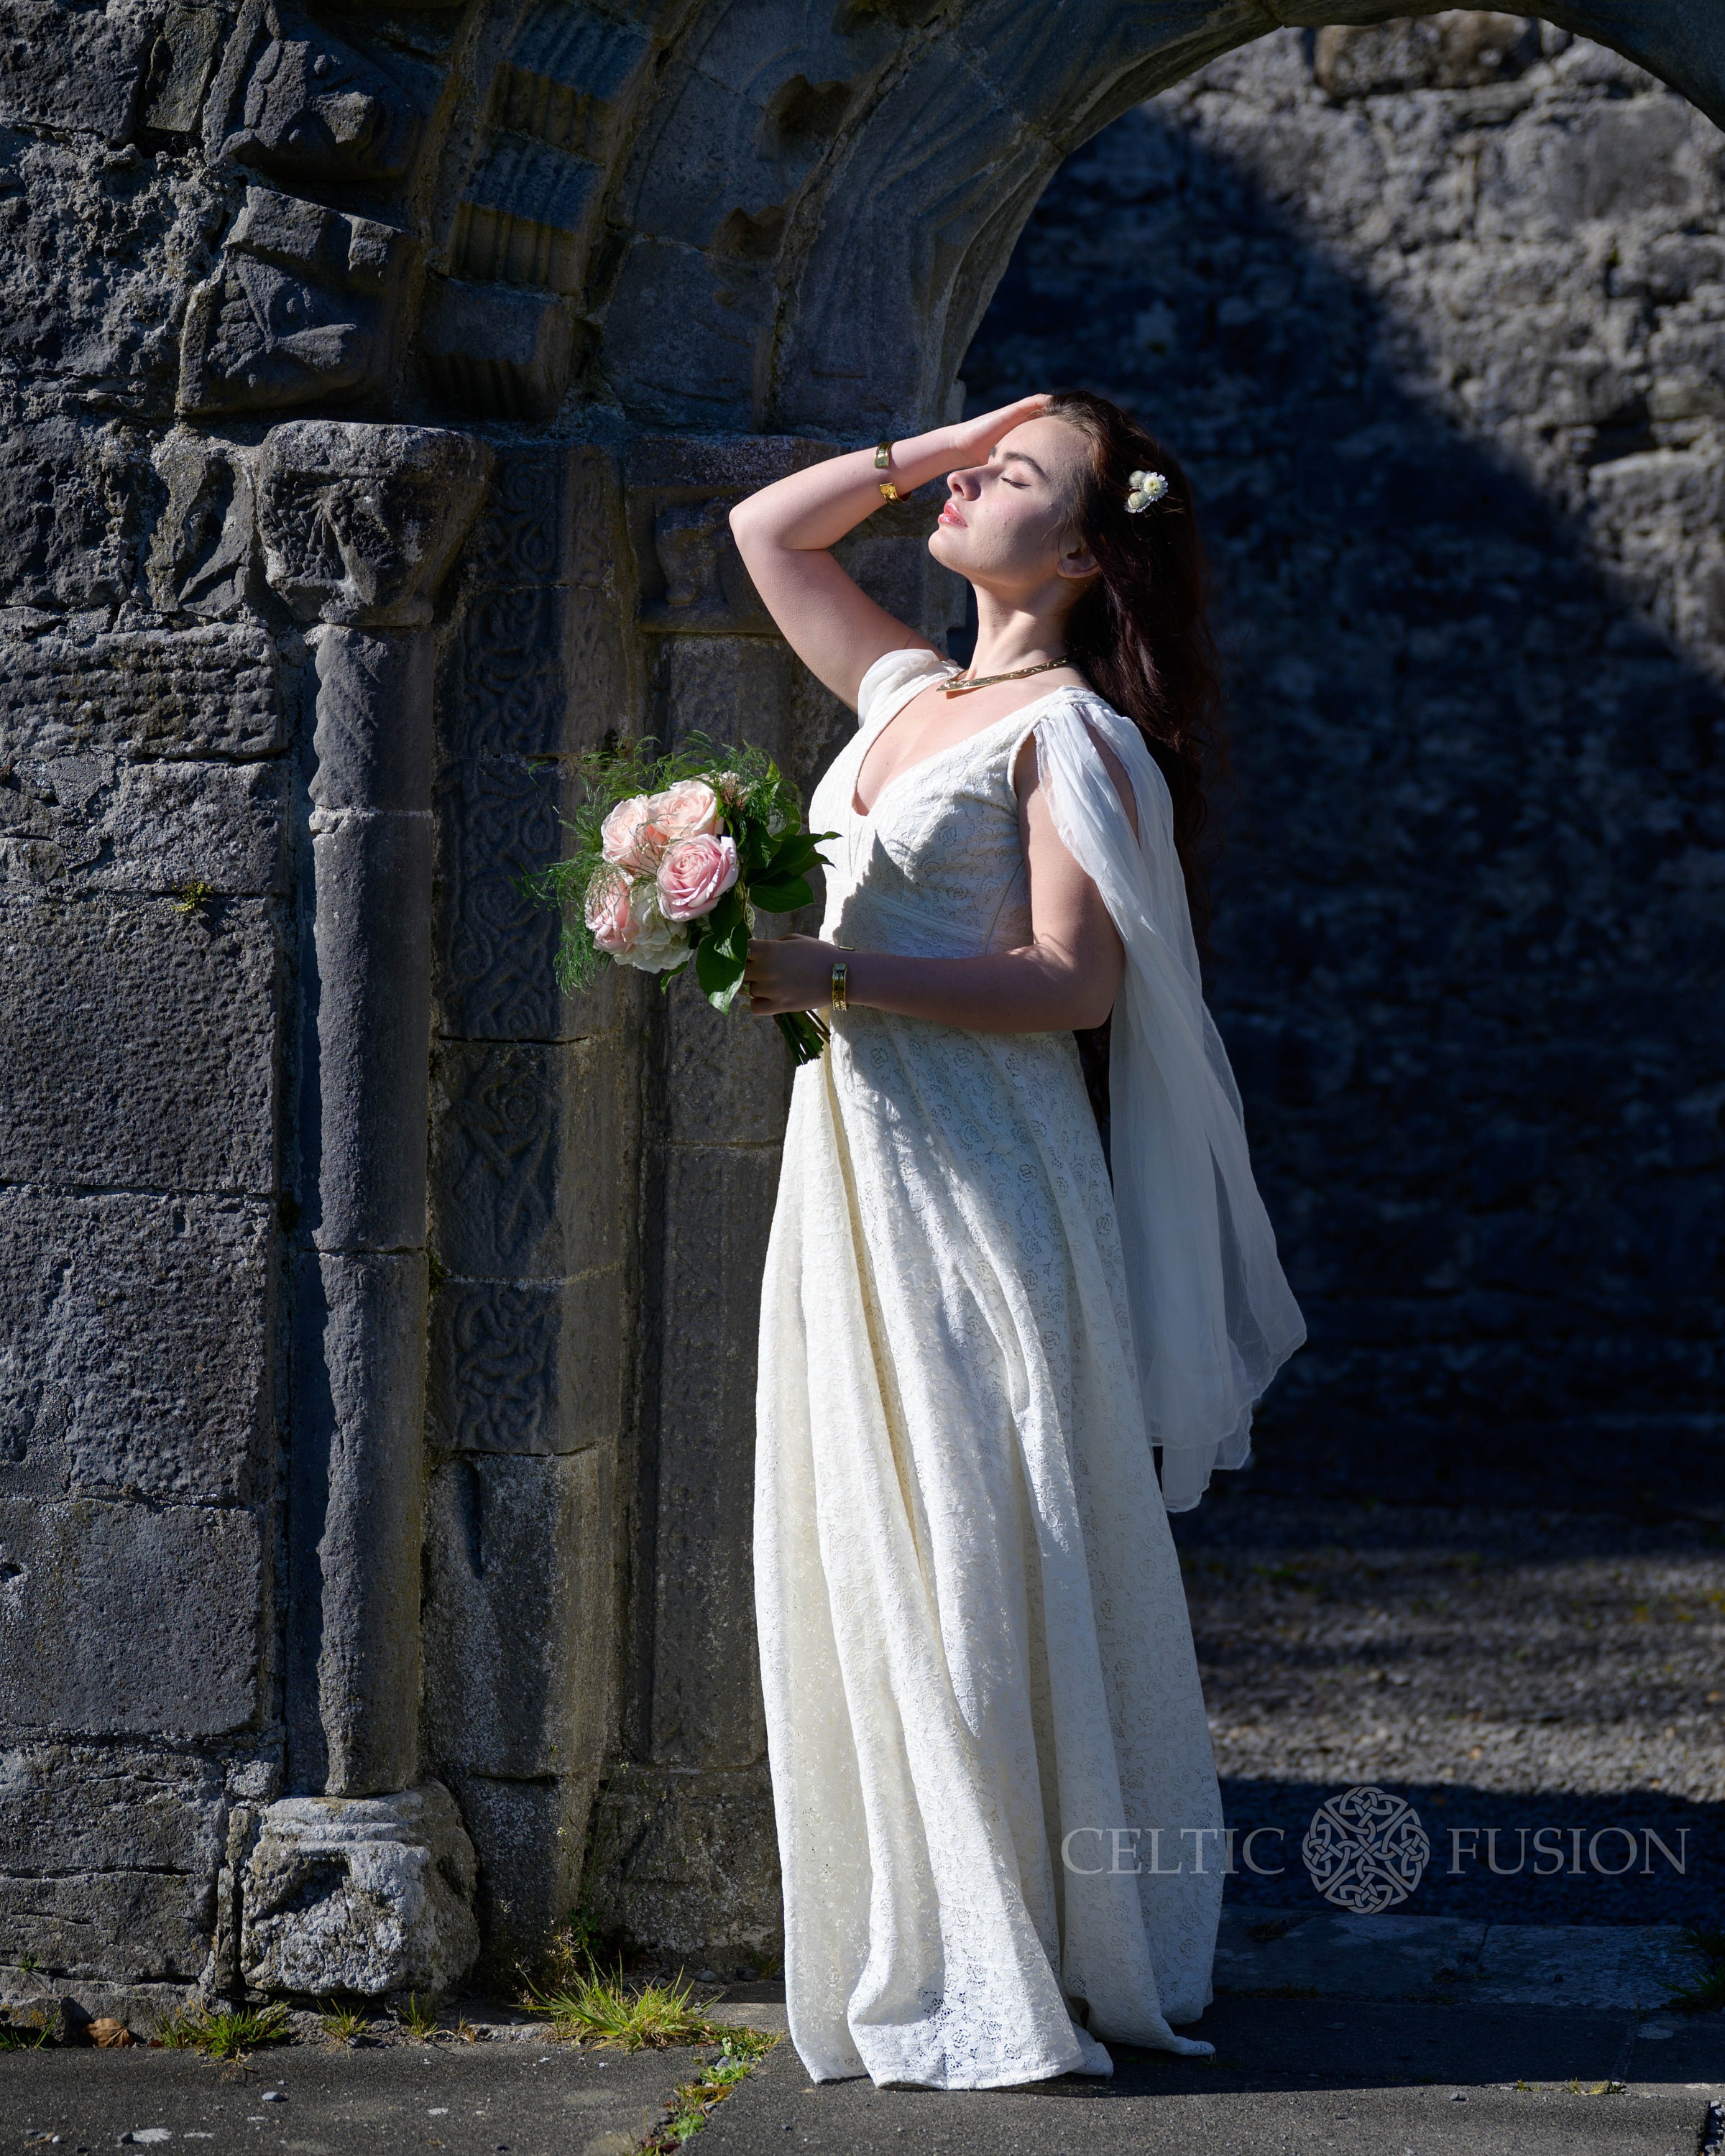 Ancient Irish wedding traditions you may not know about